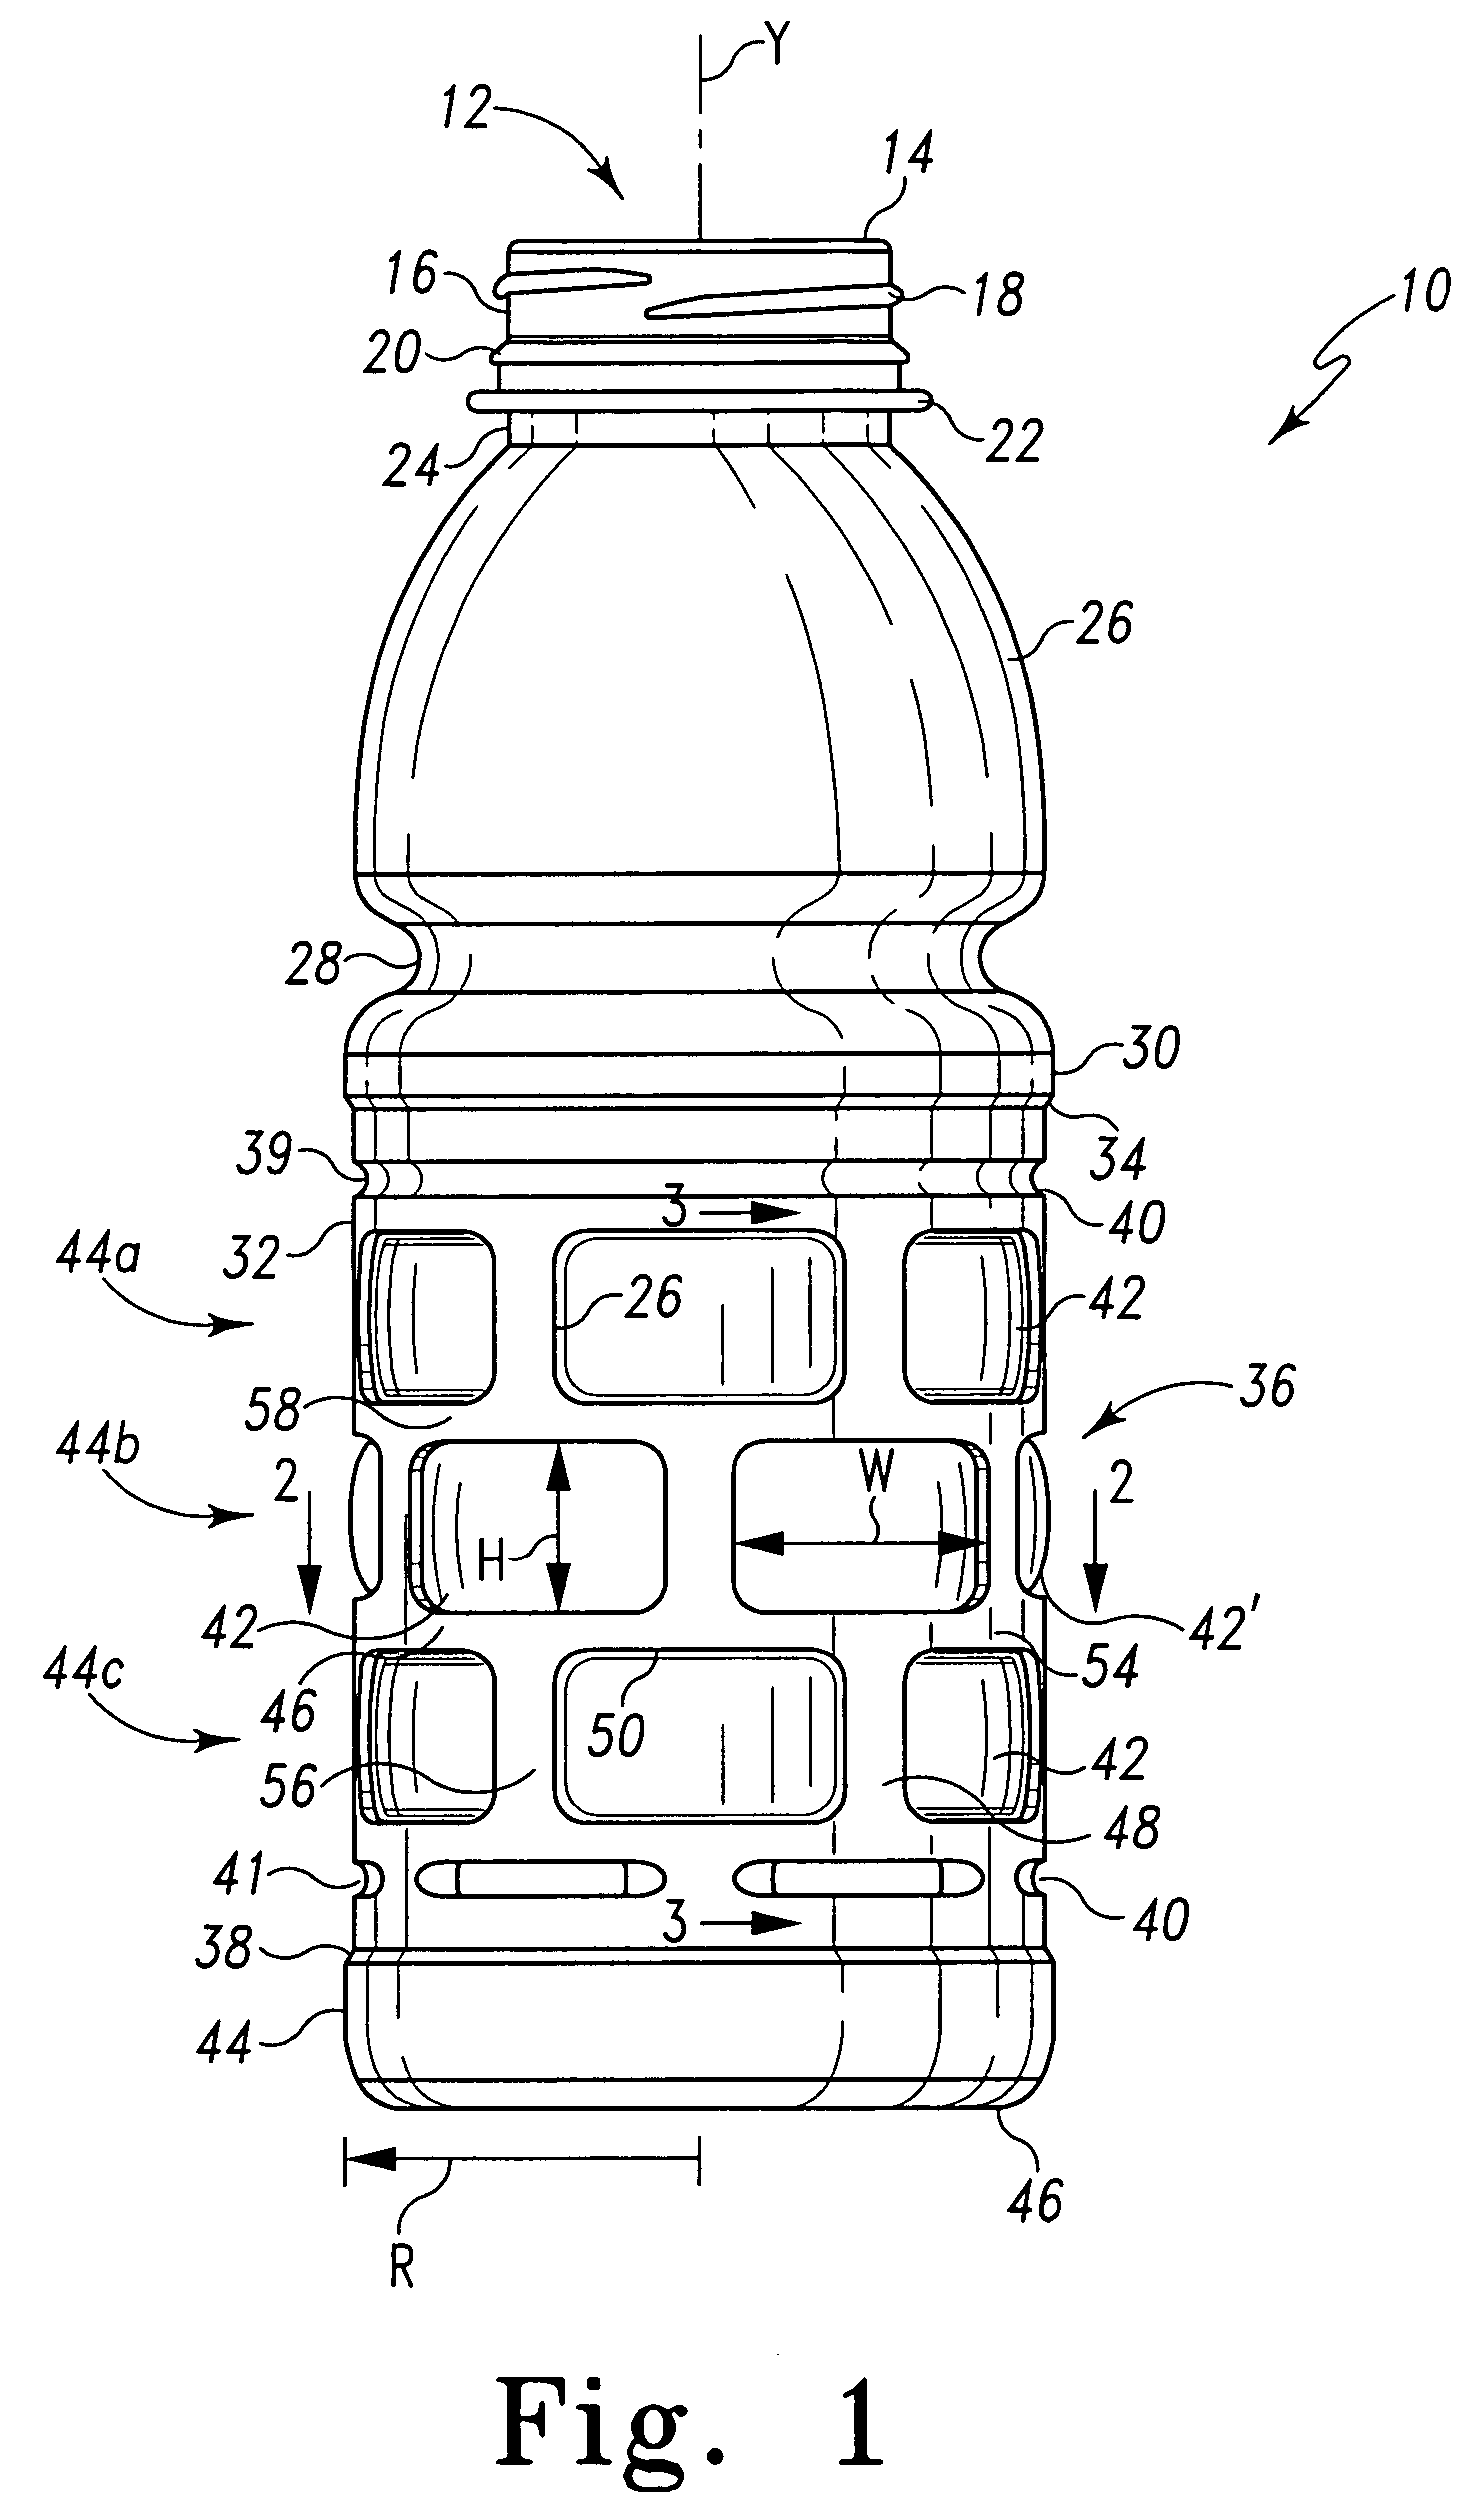 Plastic container with horizontally oriented panels